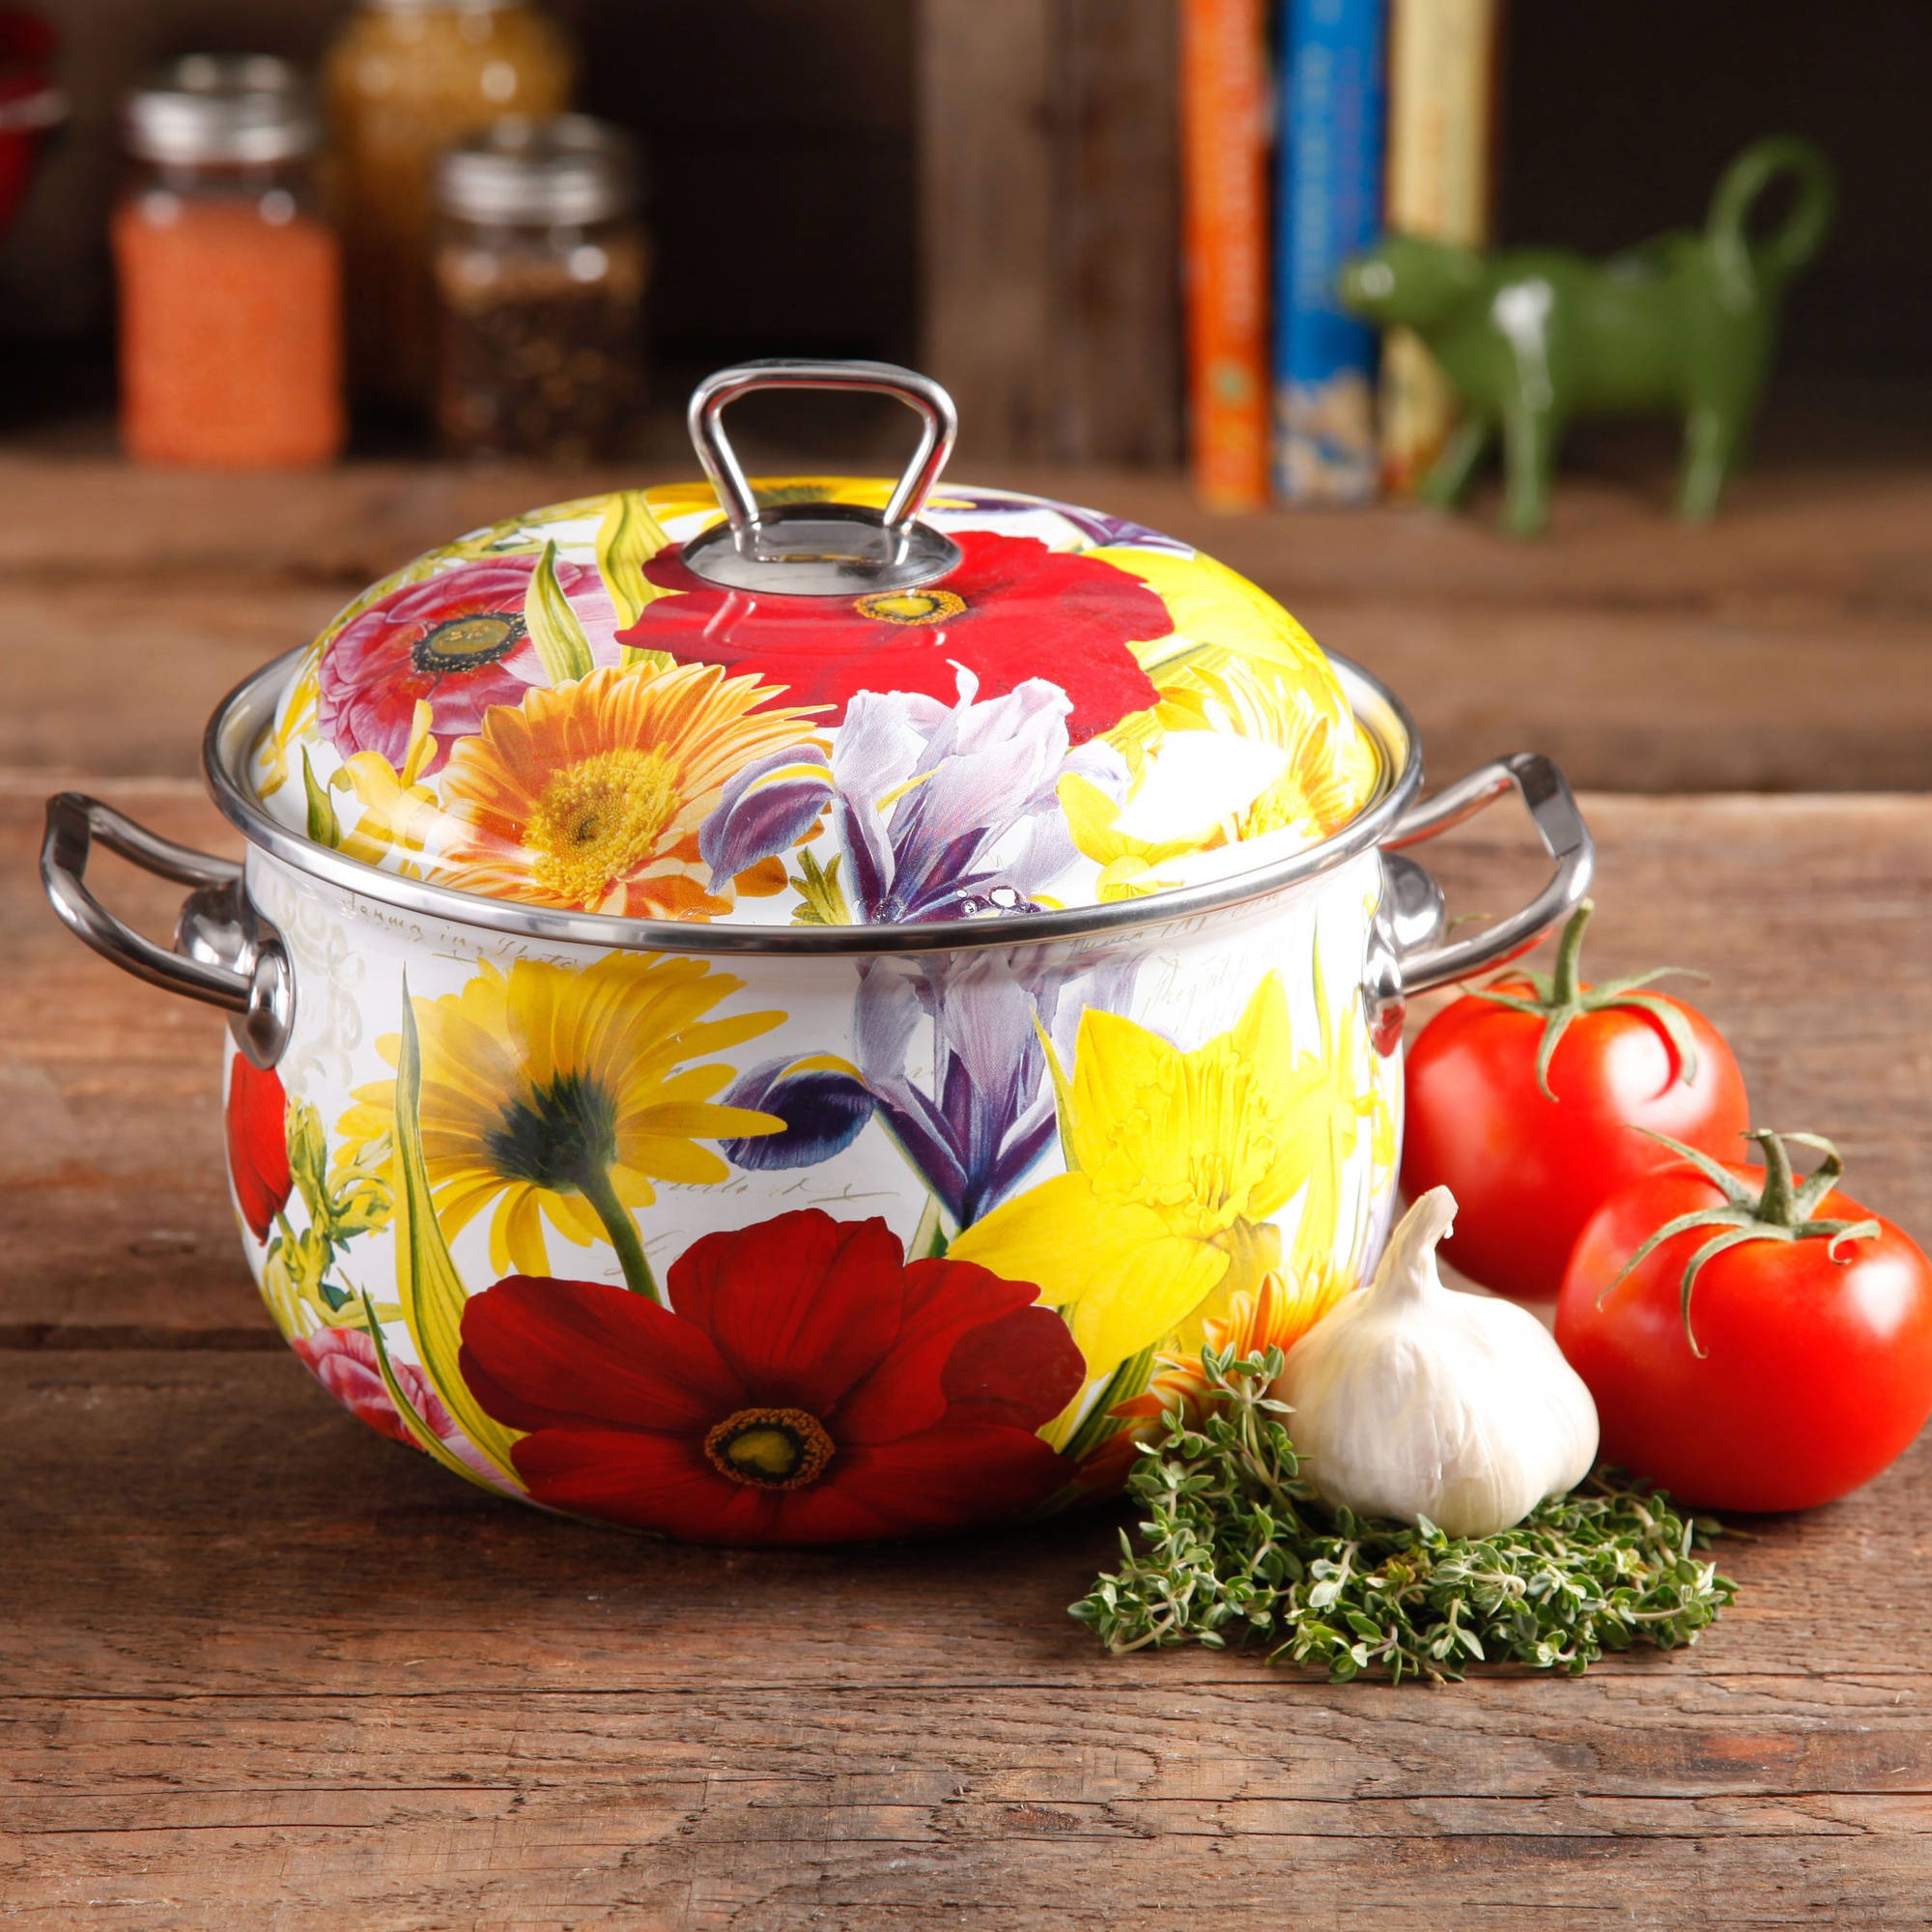 The Pioneer Woman Floral Garden 4-Quart Dutch Oven - image 1 of 2